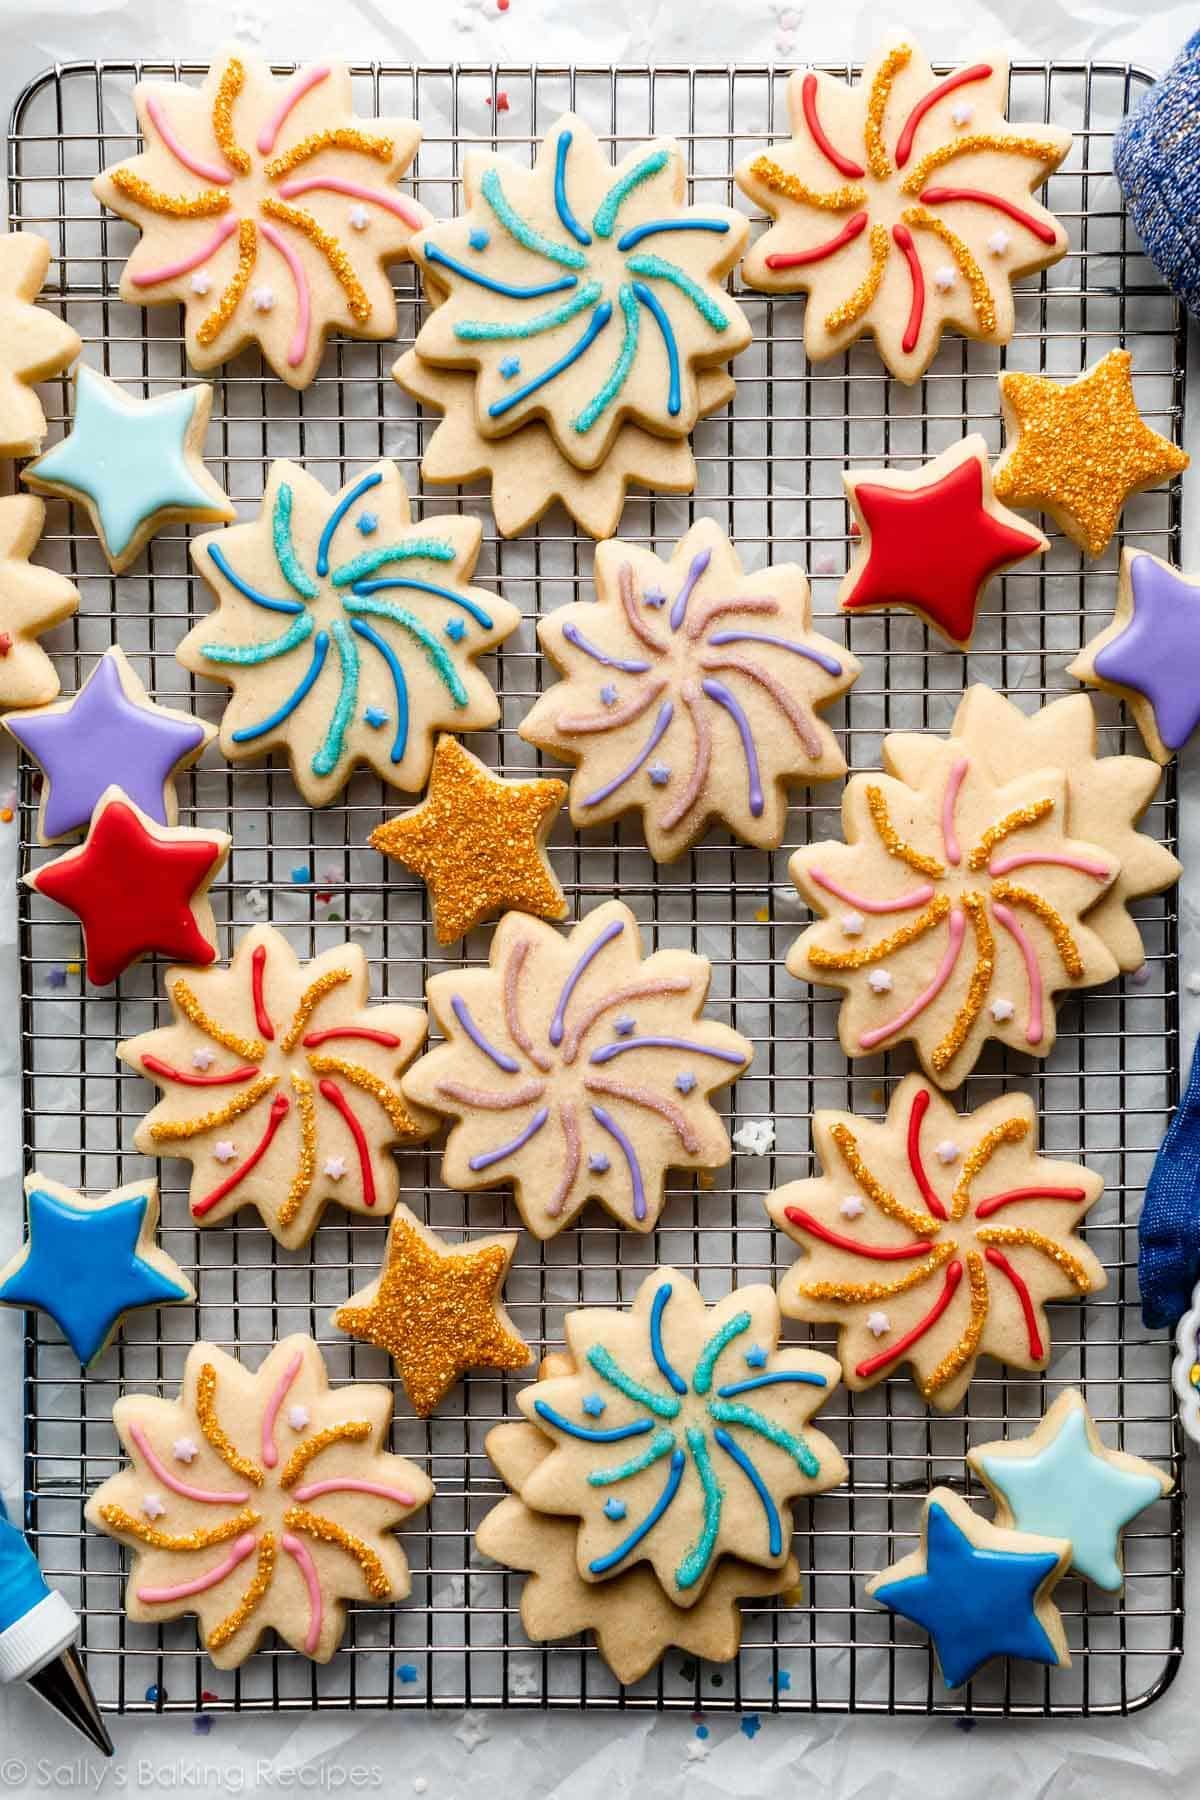 decorated fireworks celebration and star-shaped sugar cookies with various colors of icing and gold sprinkles on top of wire cooling rack.